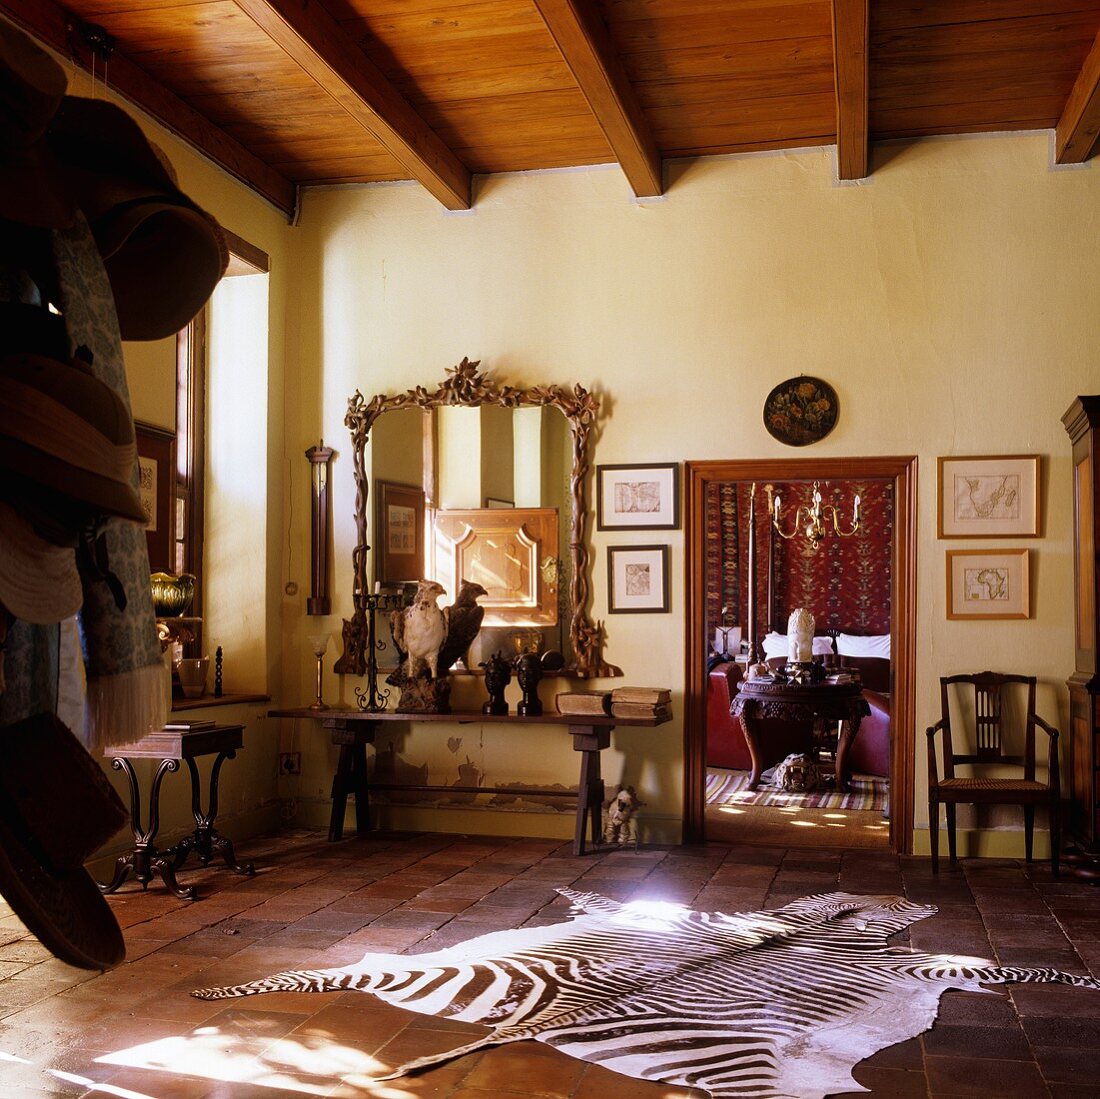 An entrance hall in a South African house with a zebra skin rug on the terracotta floor and an open doorway leading to a living room